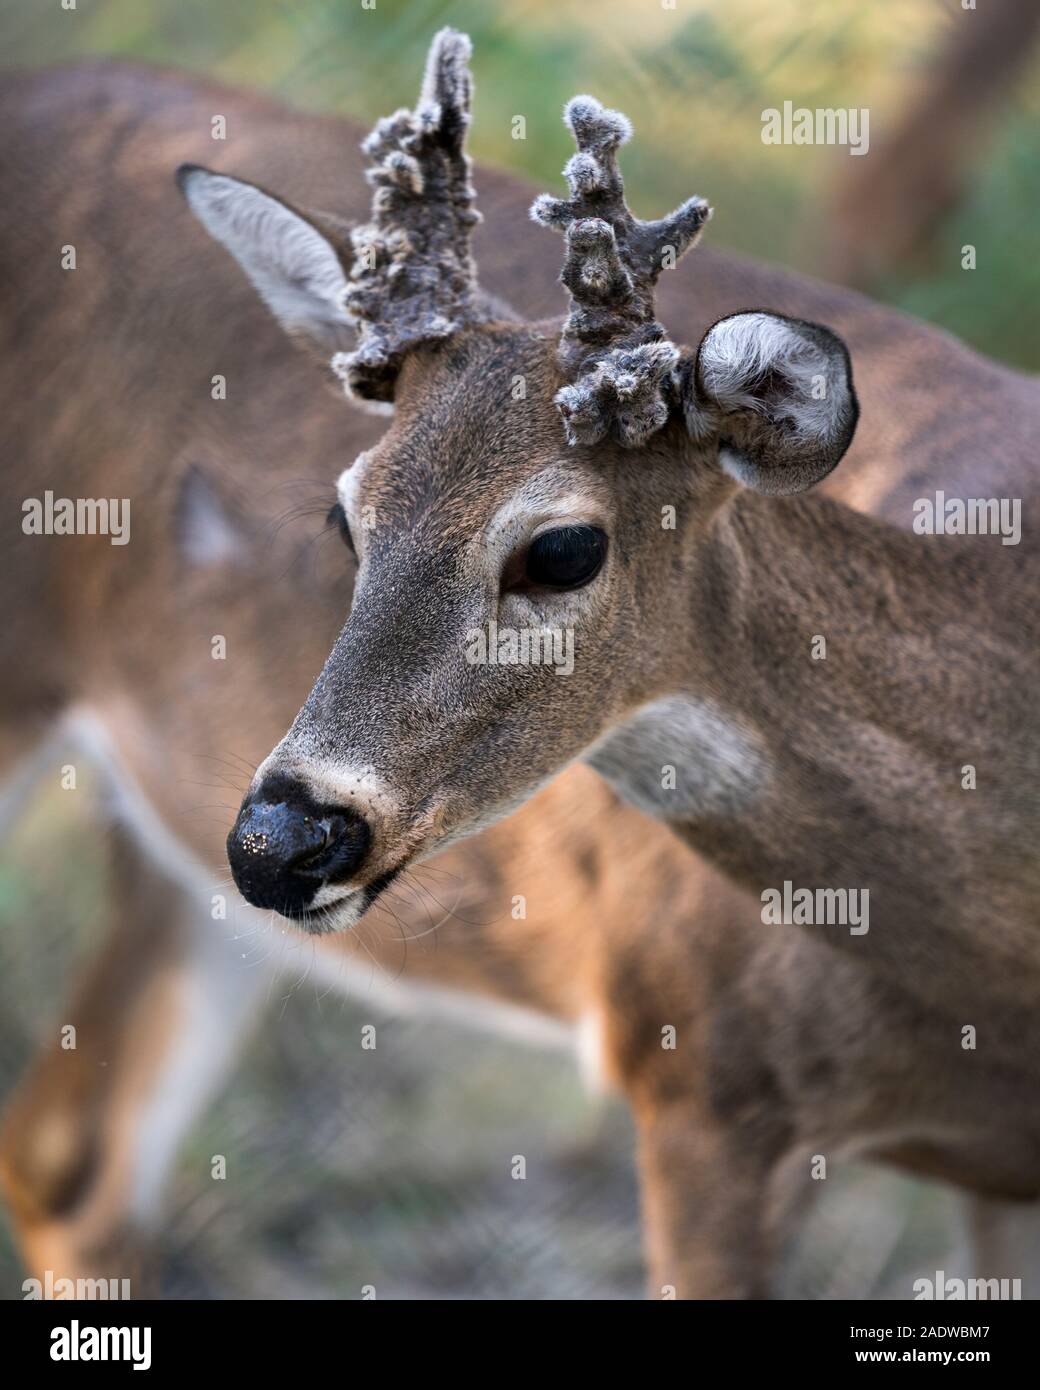 Deer animal White-tailed dear head close-up profile view with bokeh background exposing its head, antlers, ears, eye, mouth, nose, brown fur. Stock Photo